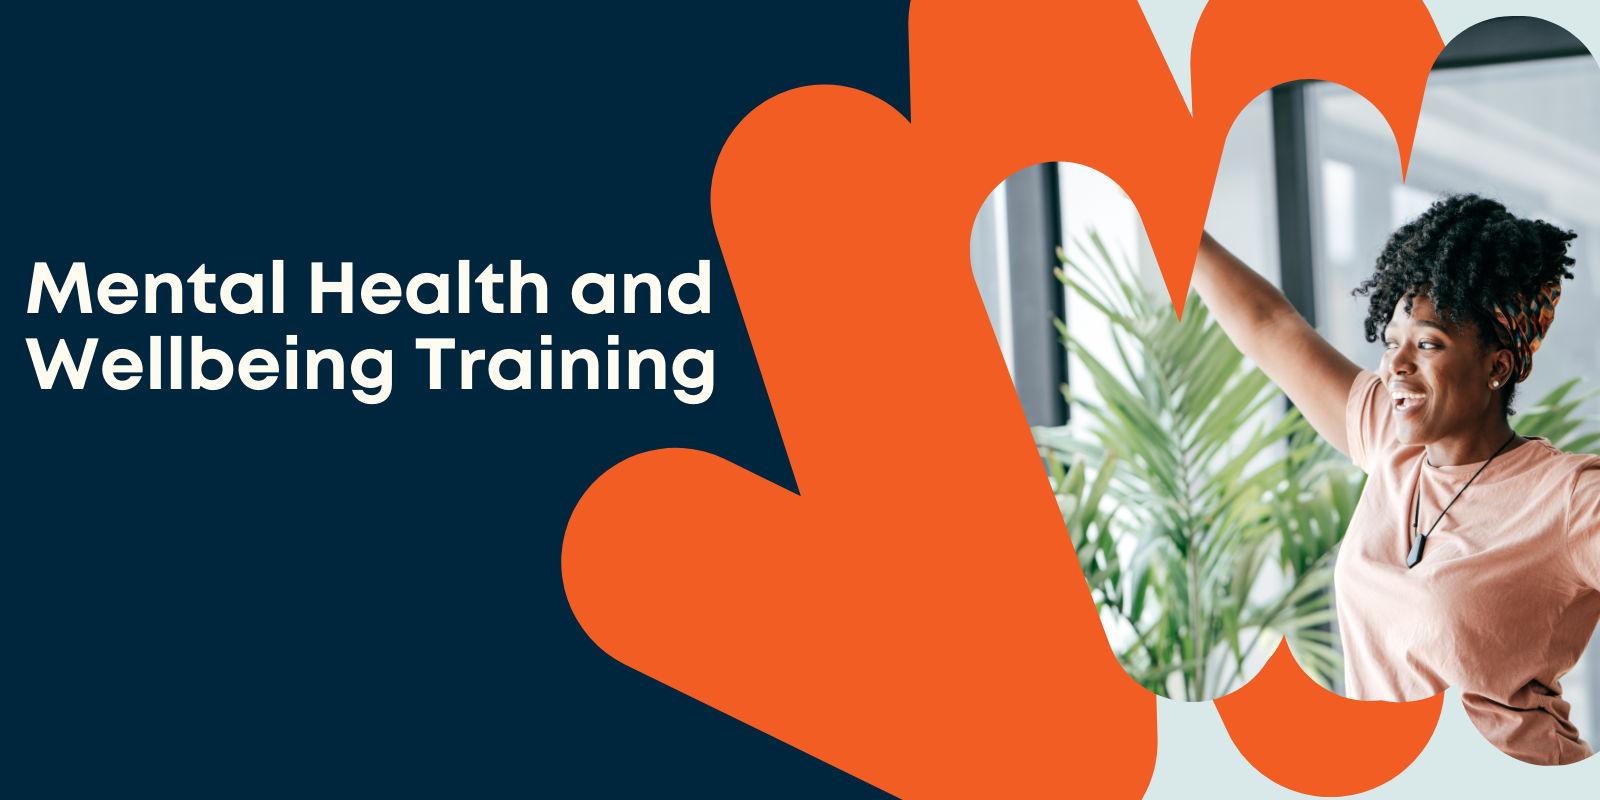 Mental Health and Wellbeing Training